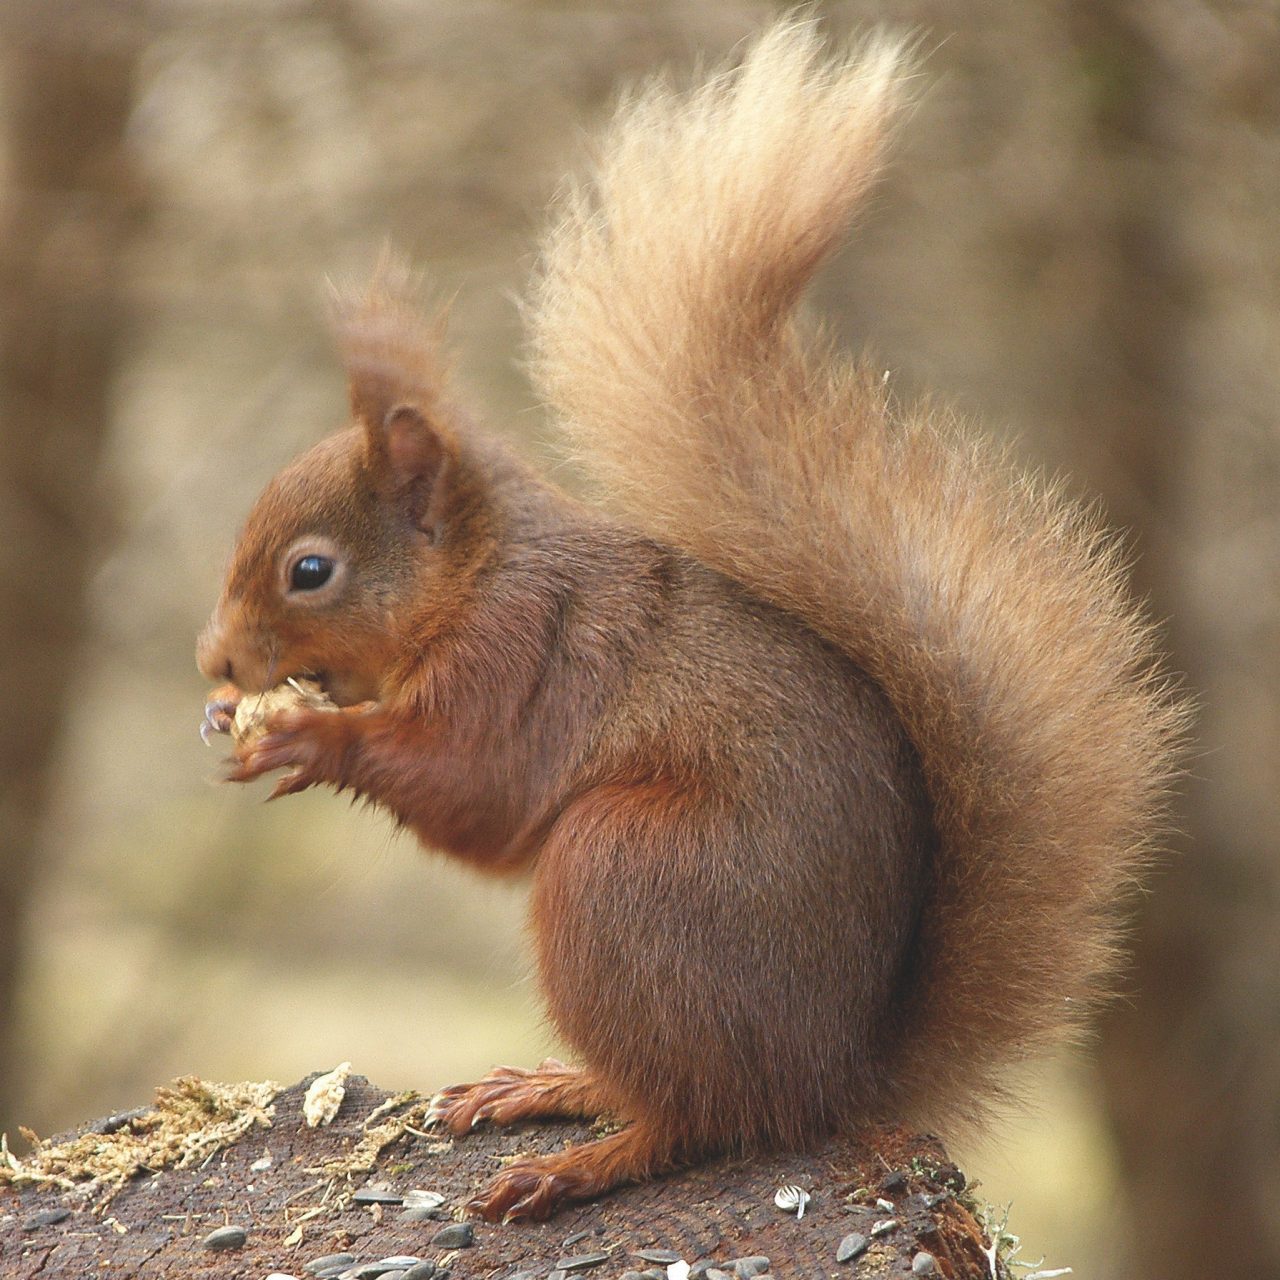 A red squirrel eating nuts